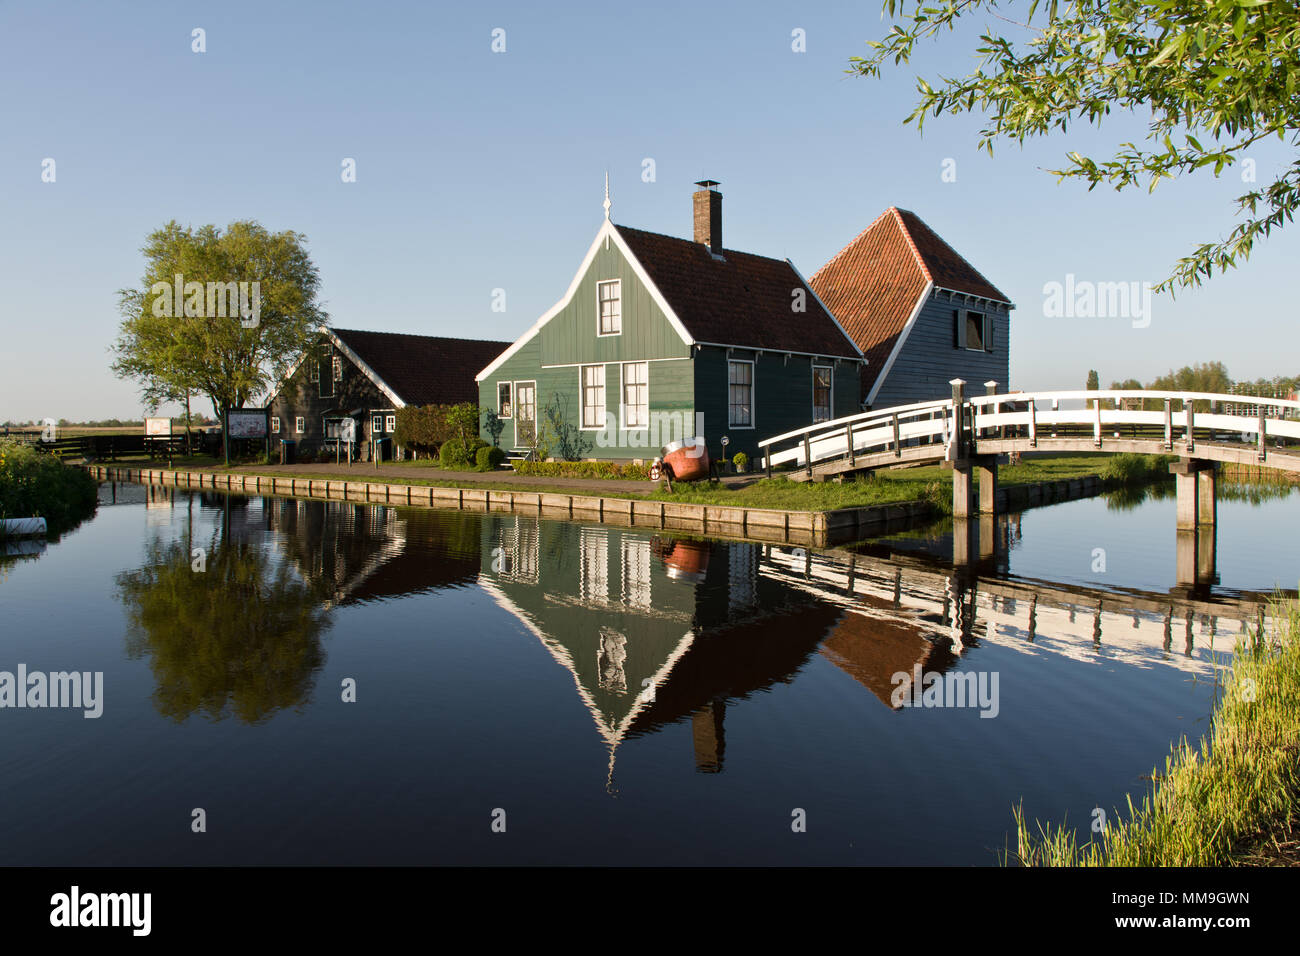 Traditional Dutch house in Zaanse Schans, The Netherlands Stock Photo